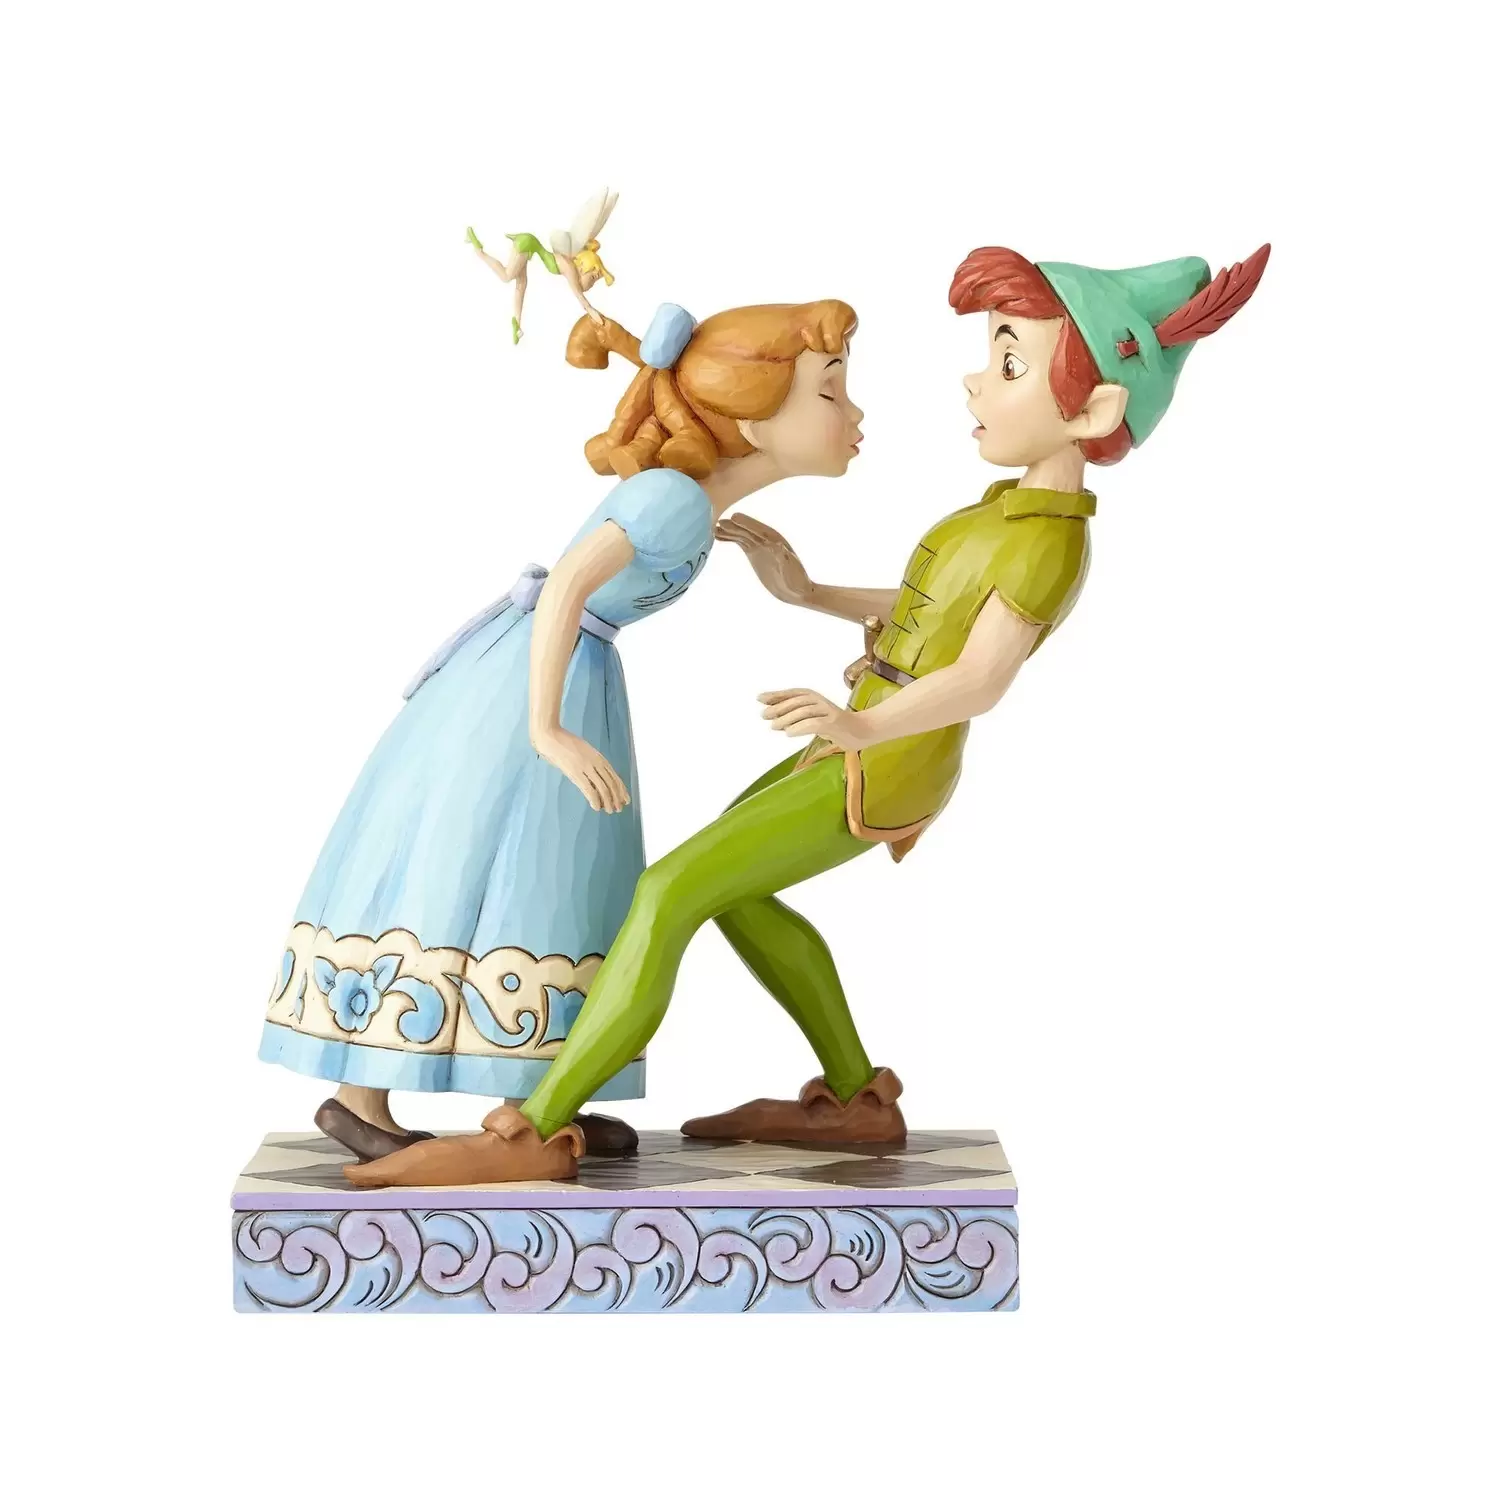 Disney Traditions by Jim Shore - An Unexpected Kiss - Peter Pan and Wendy 65th Anniversary